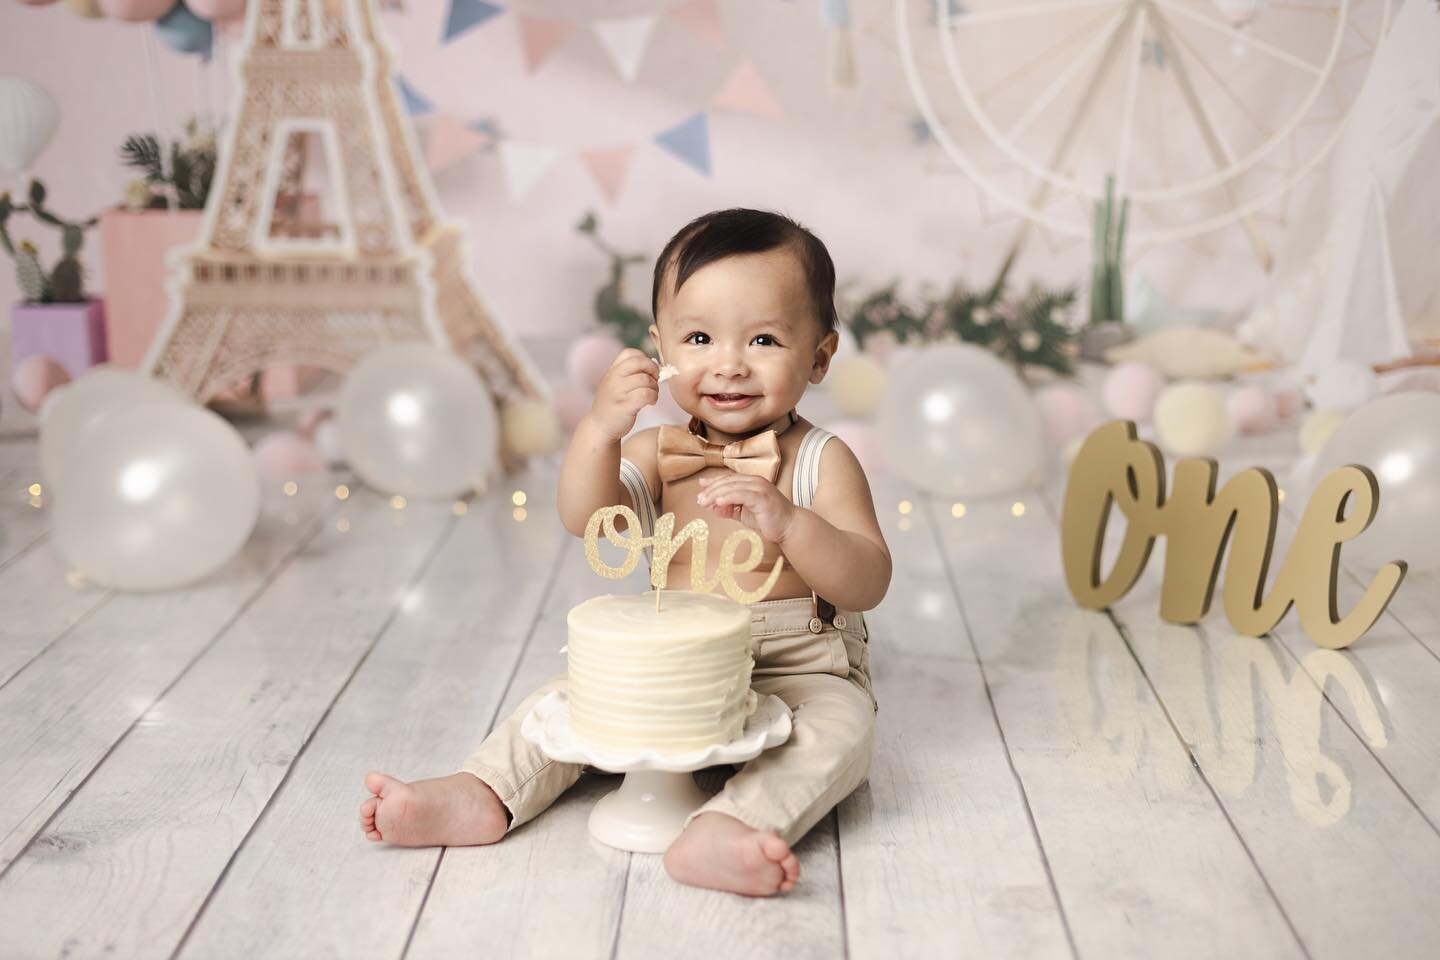 Happy little cake smasher! ❤️ 
Don&rsquo;t rule out pink for boys when it comes to photo shoots or blue for girls. Love this set for this happy little guy!
.
.
.
.
.
.
.
.
.
#calgaryphotographer #calgarycakesmash #calgarychildphotography #calgarymoms